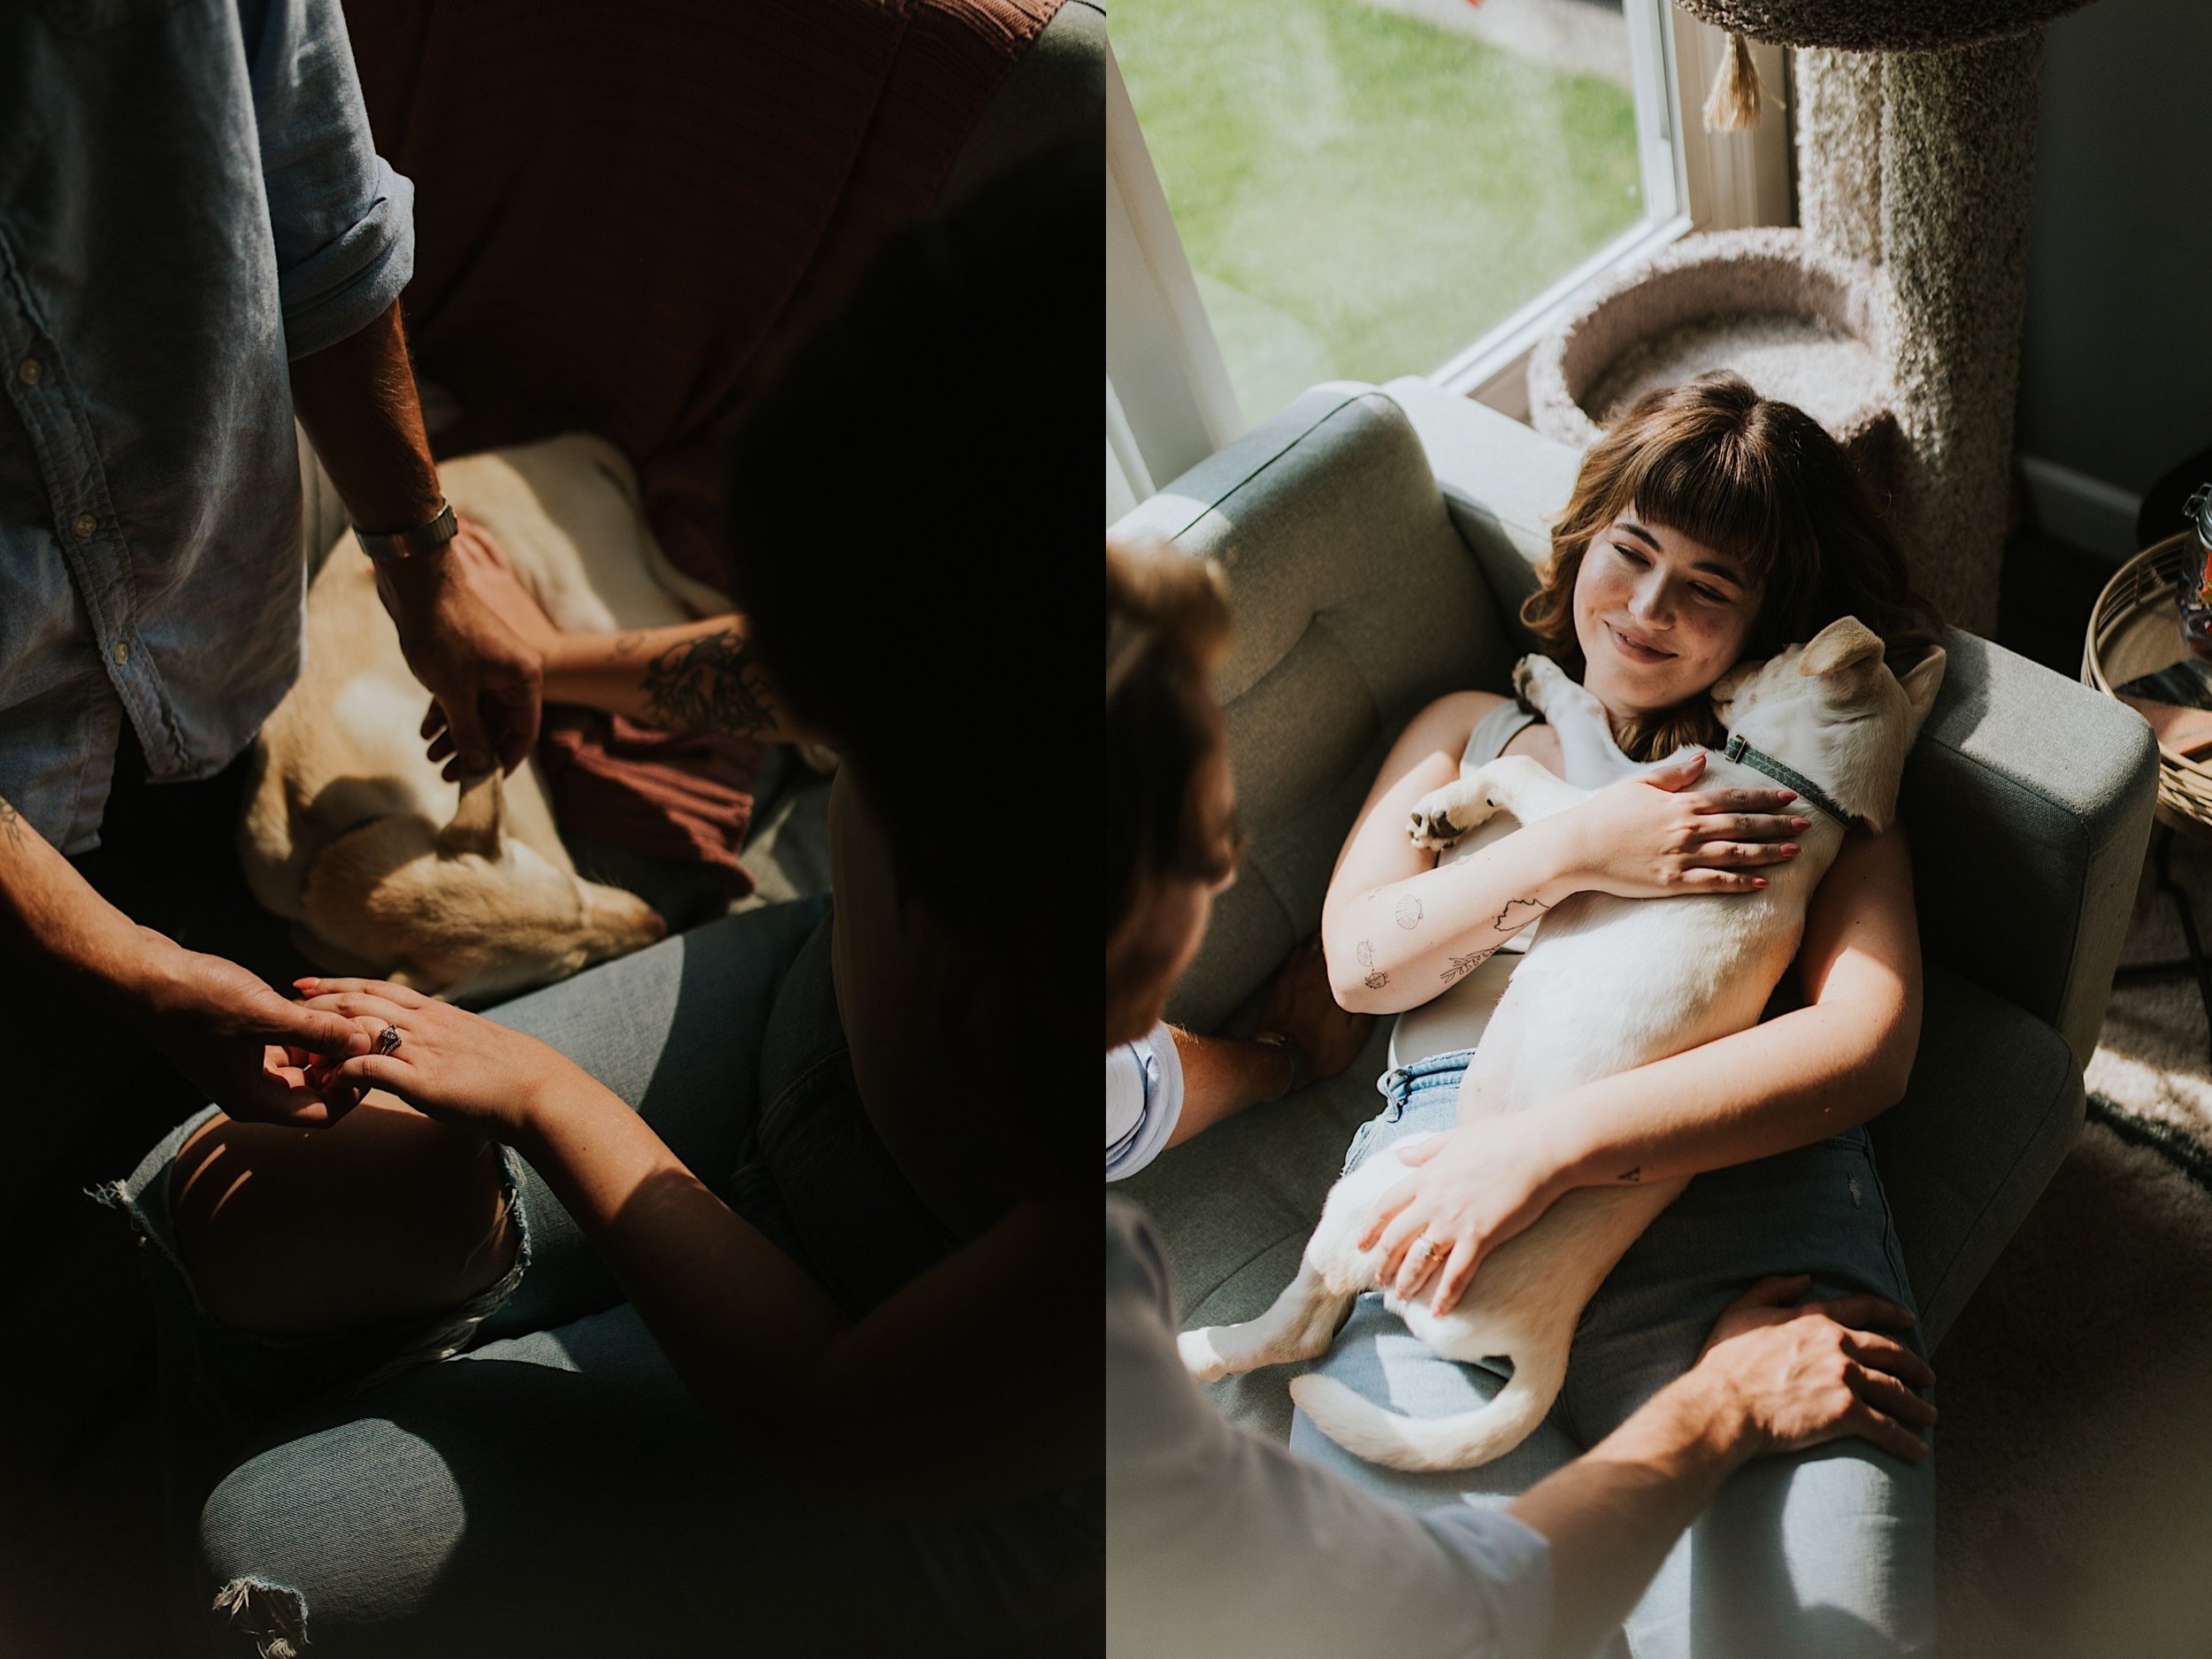 Left image is of a married couple holding hands, the image is shadowy except for their hands.  The right image is a wife holding her pup while smiling at her husband in the forefront of the image.